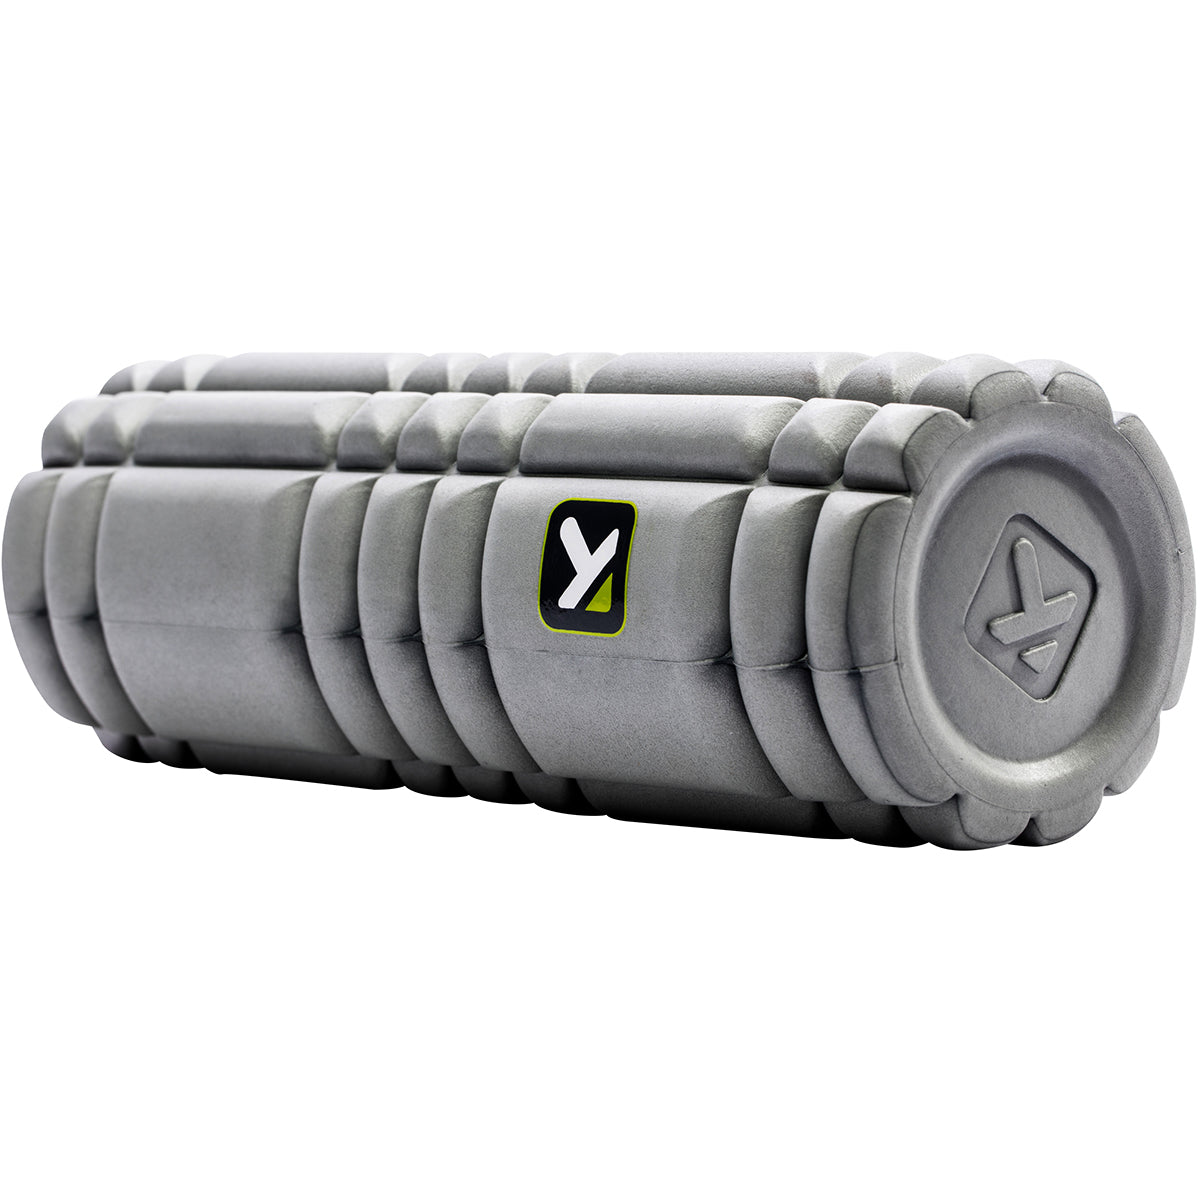 TriggerPoint 12" Solid Core Foam Roller - Gray TriggerPoint